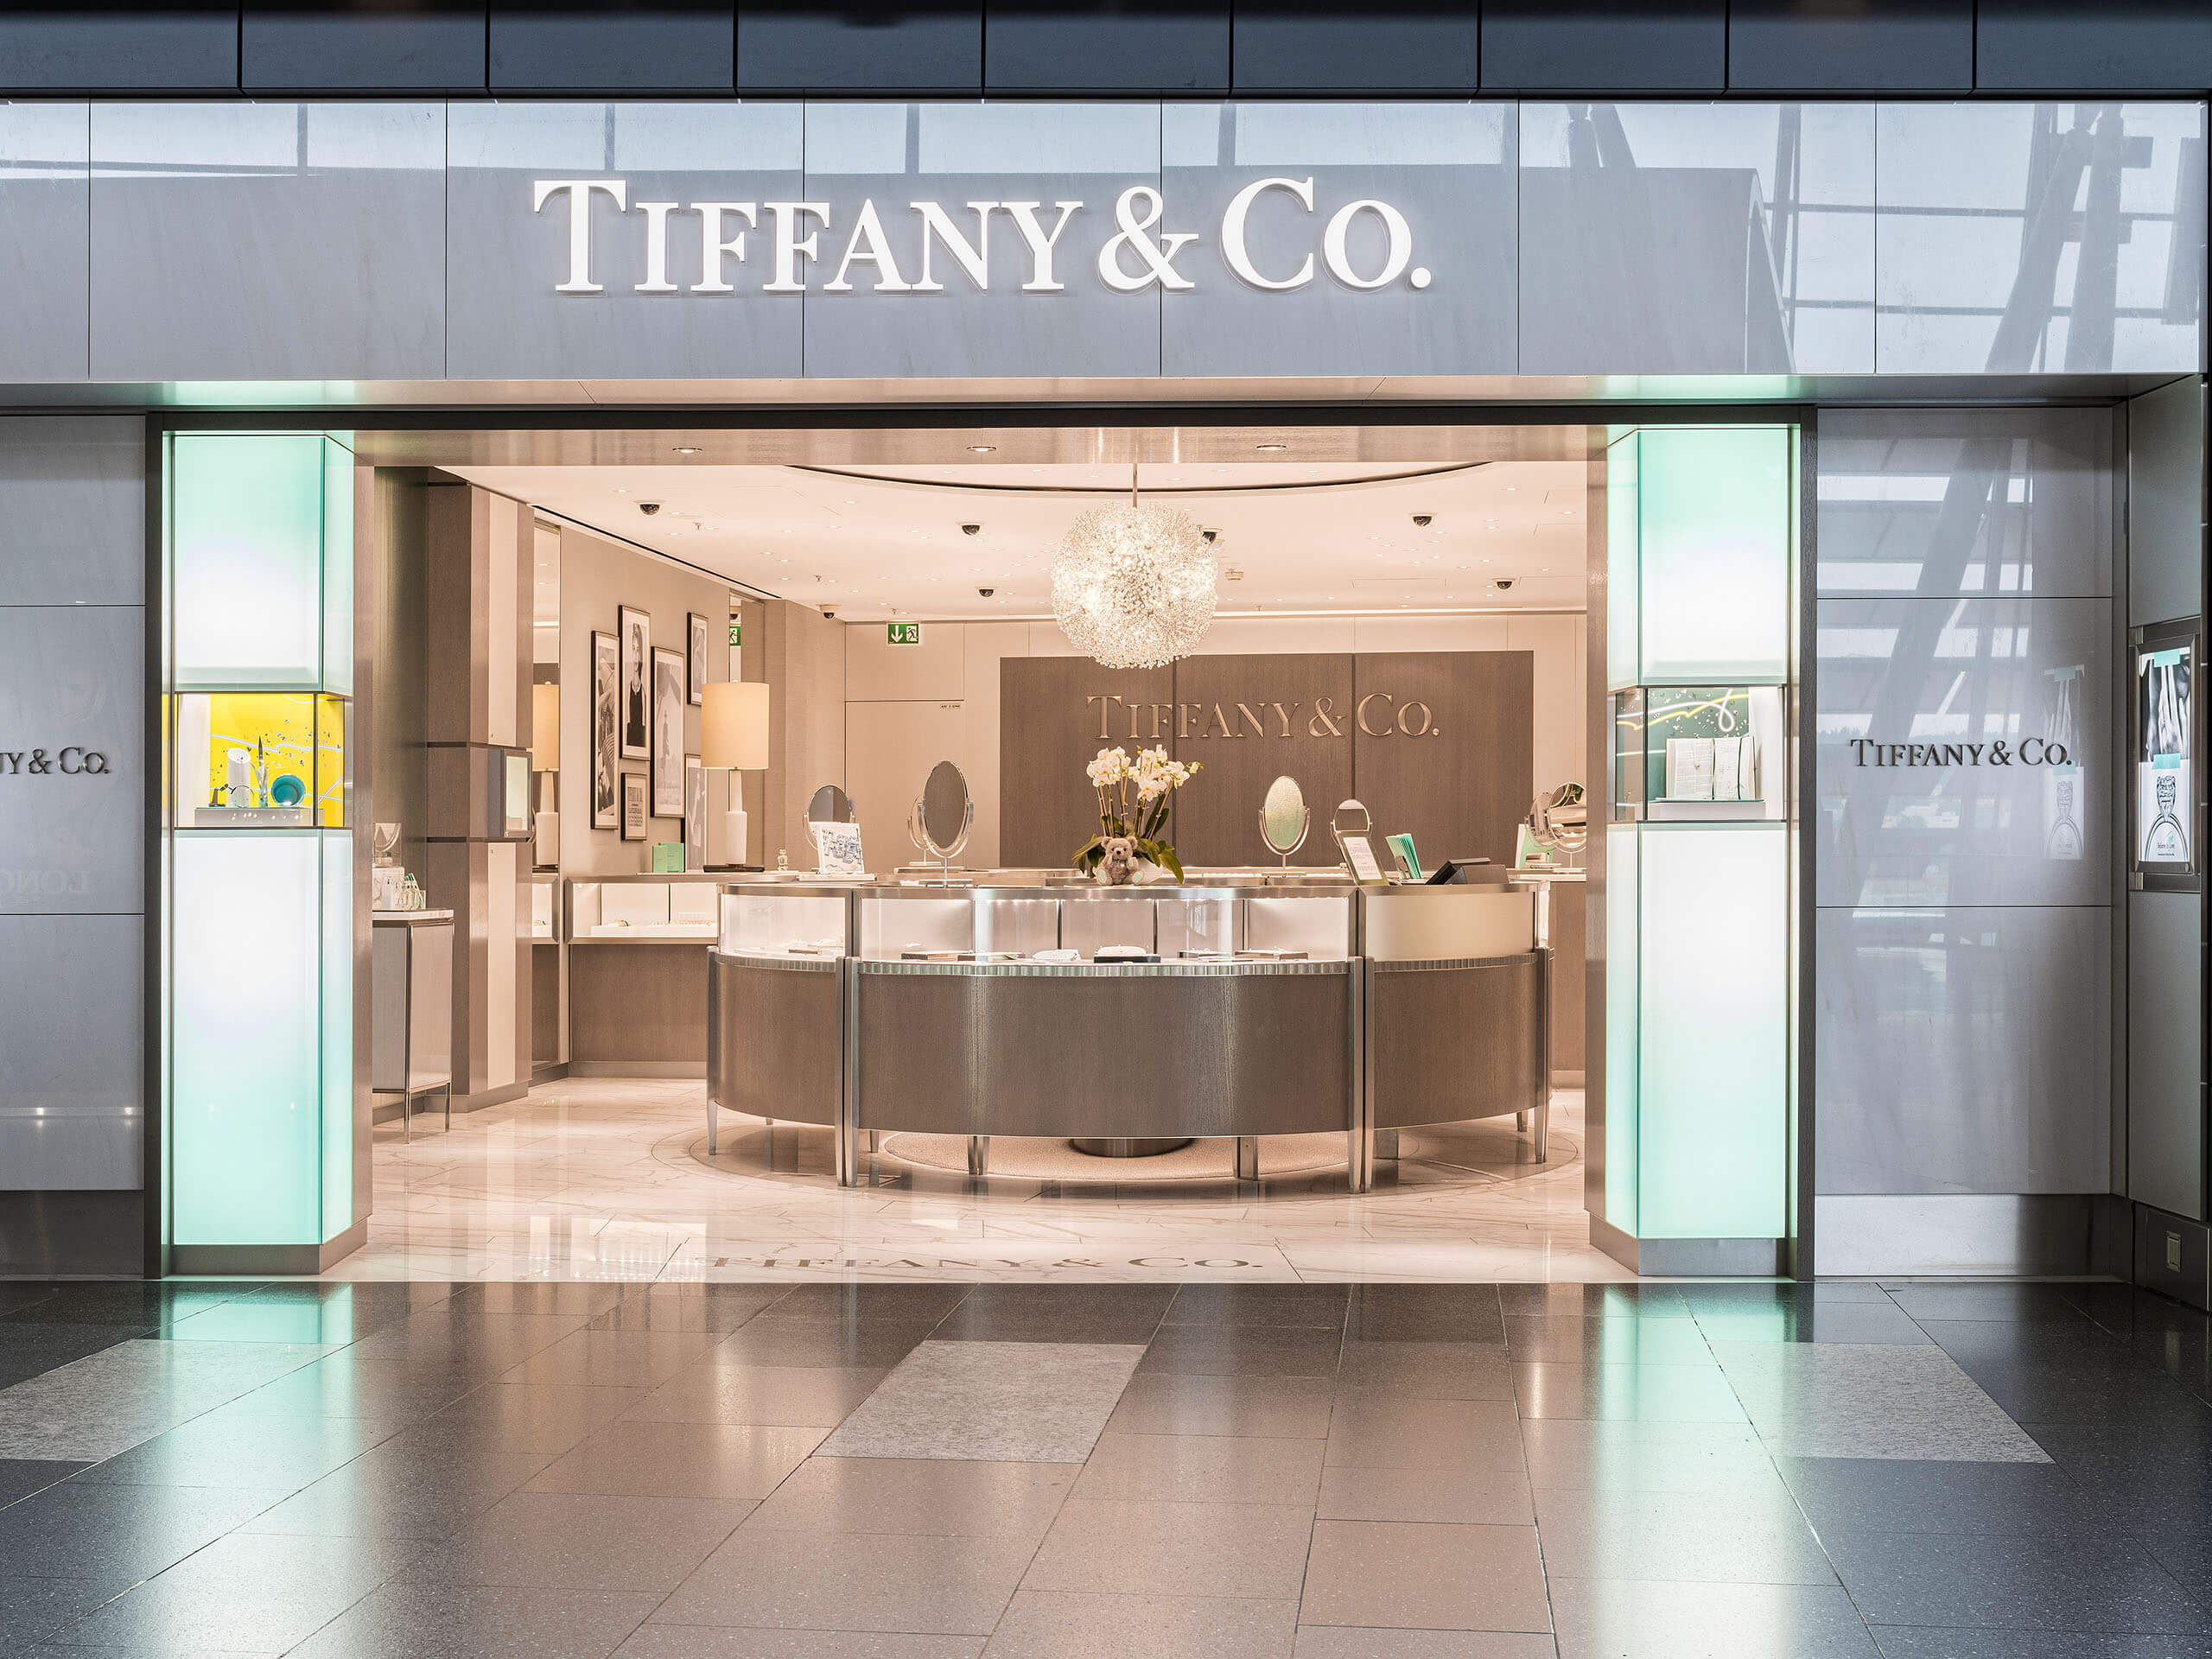 tiffany and co security